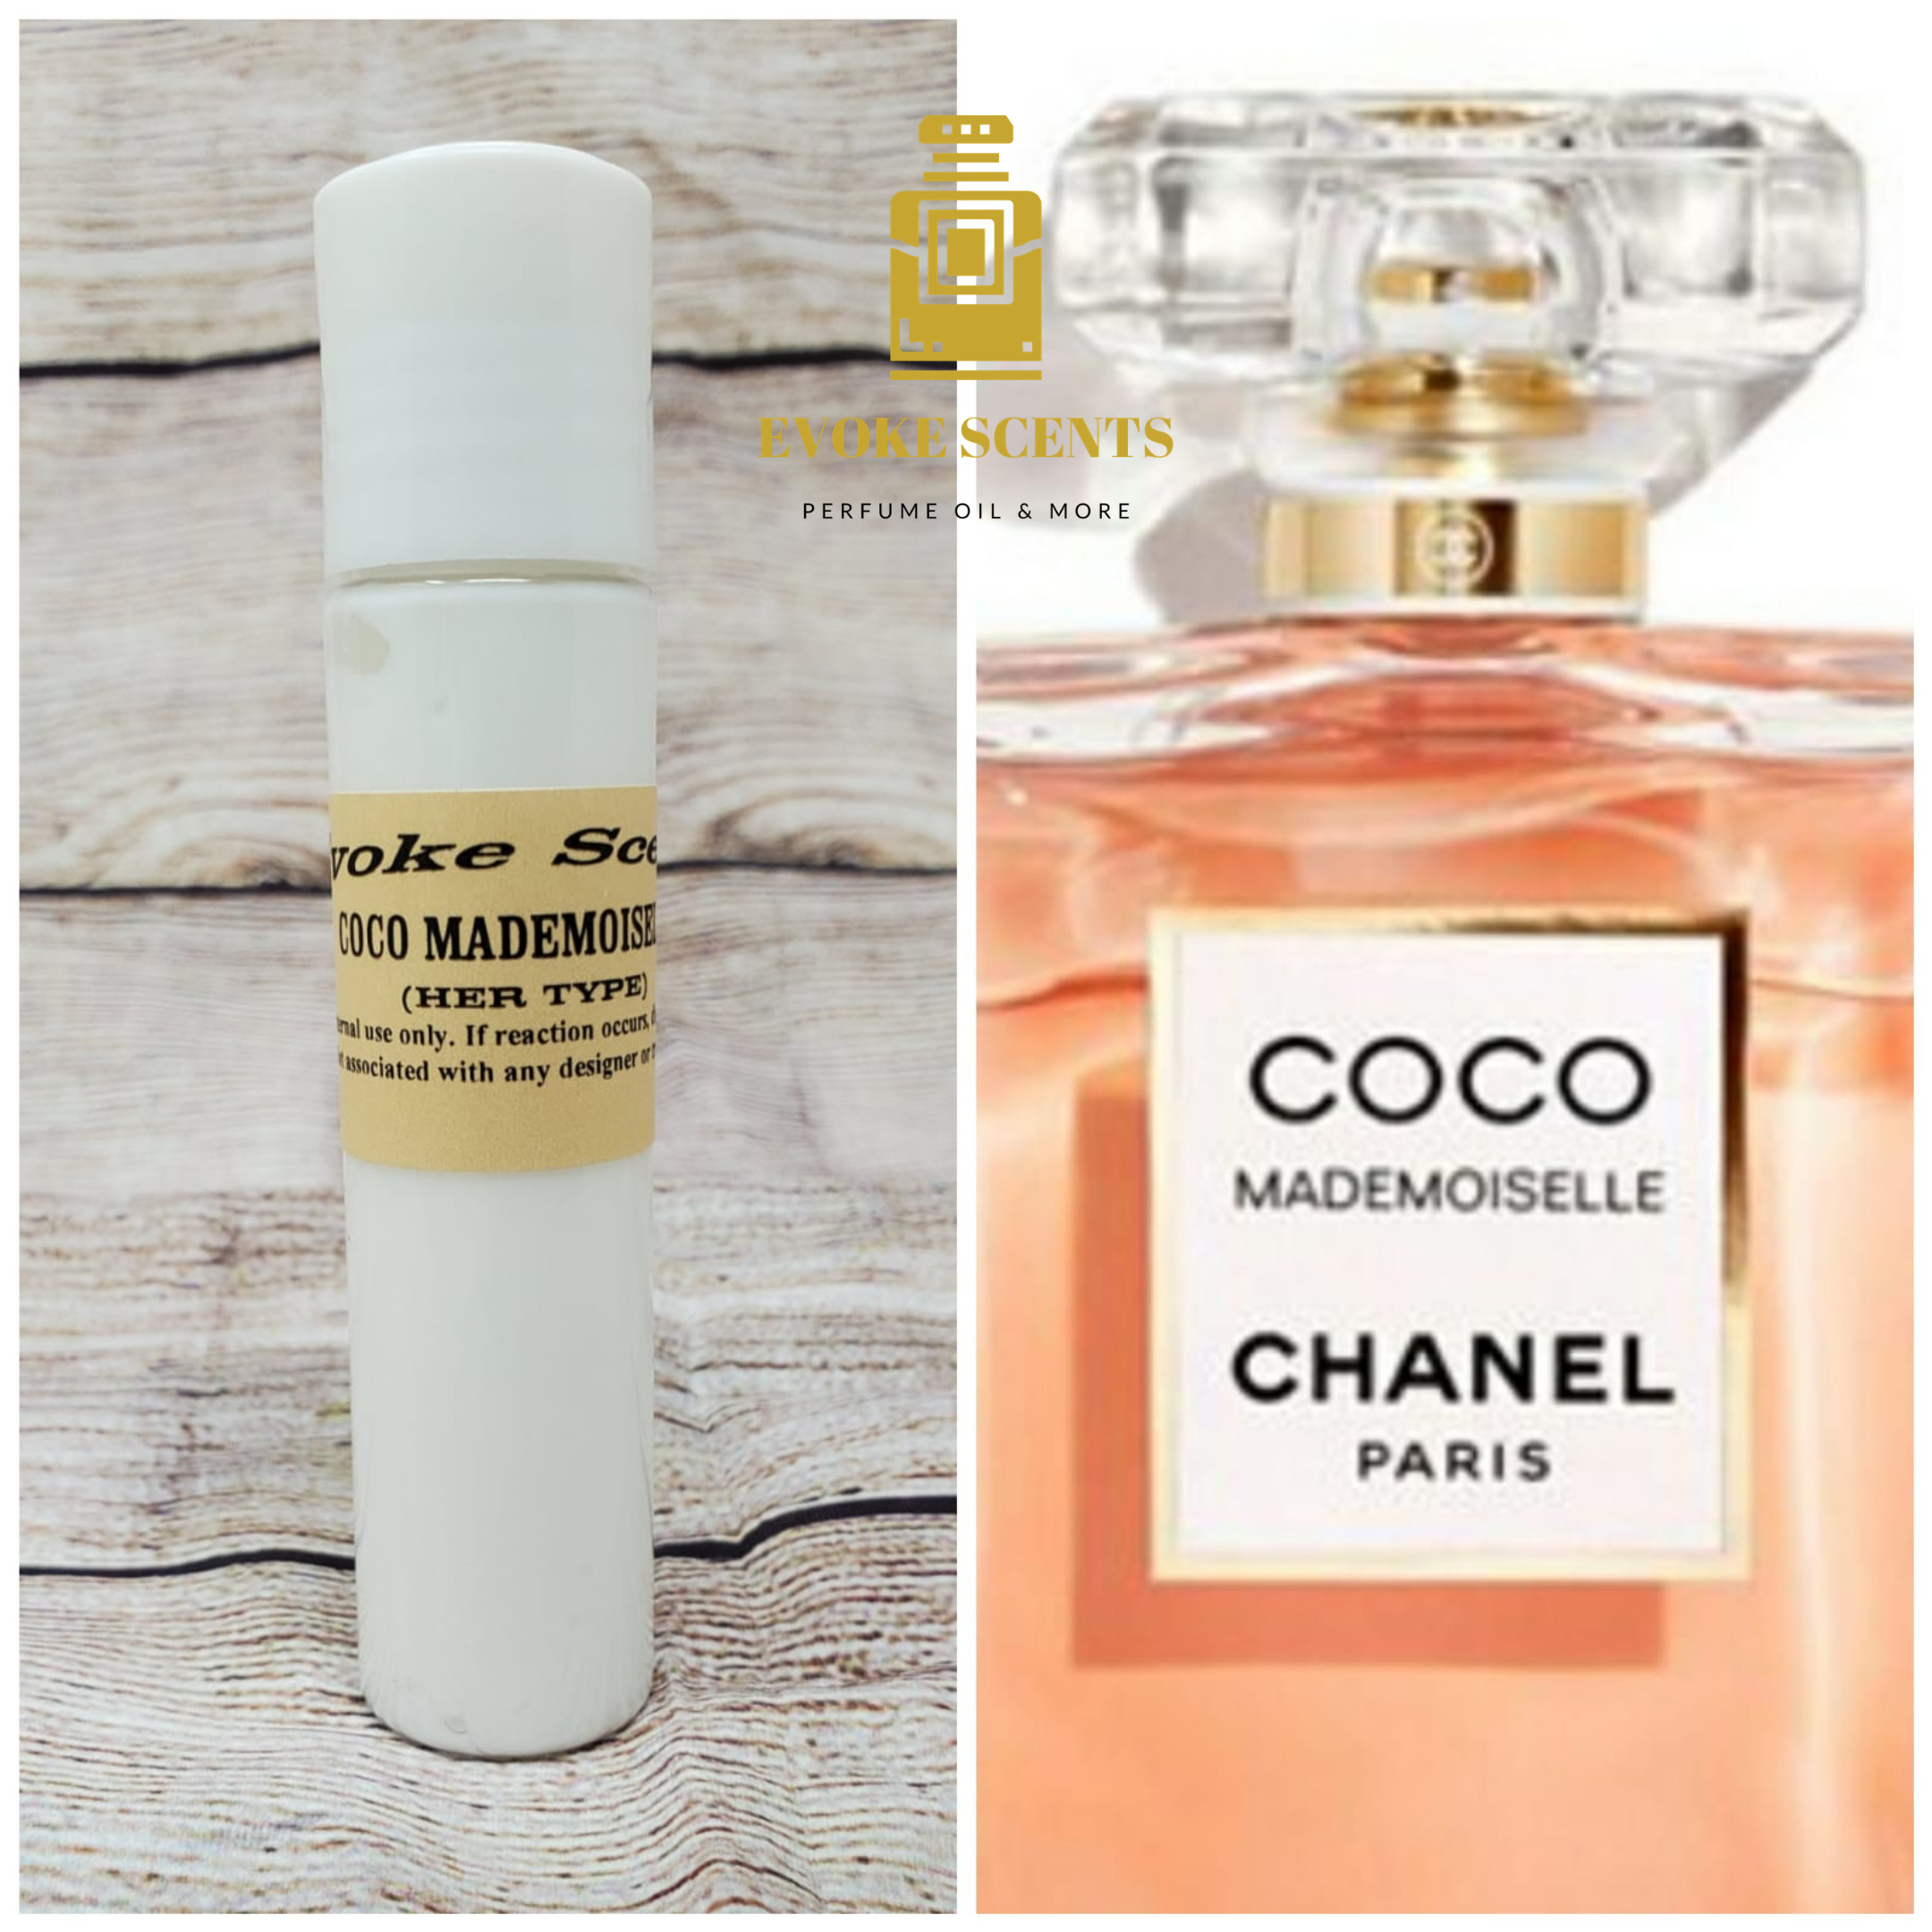 Coco Mademoiselle Intense by Chanel perfume oil for women